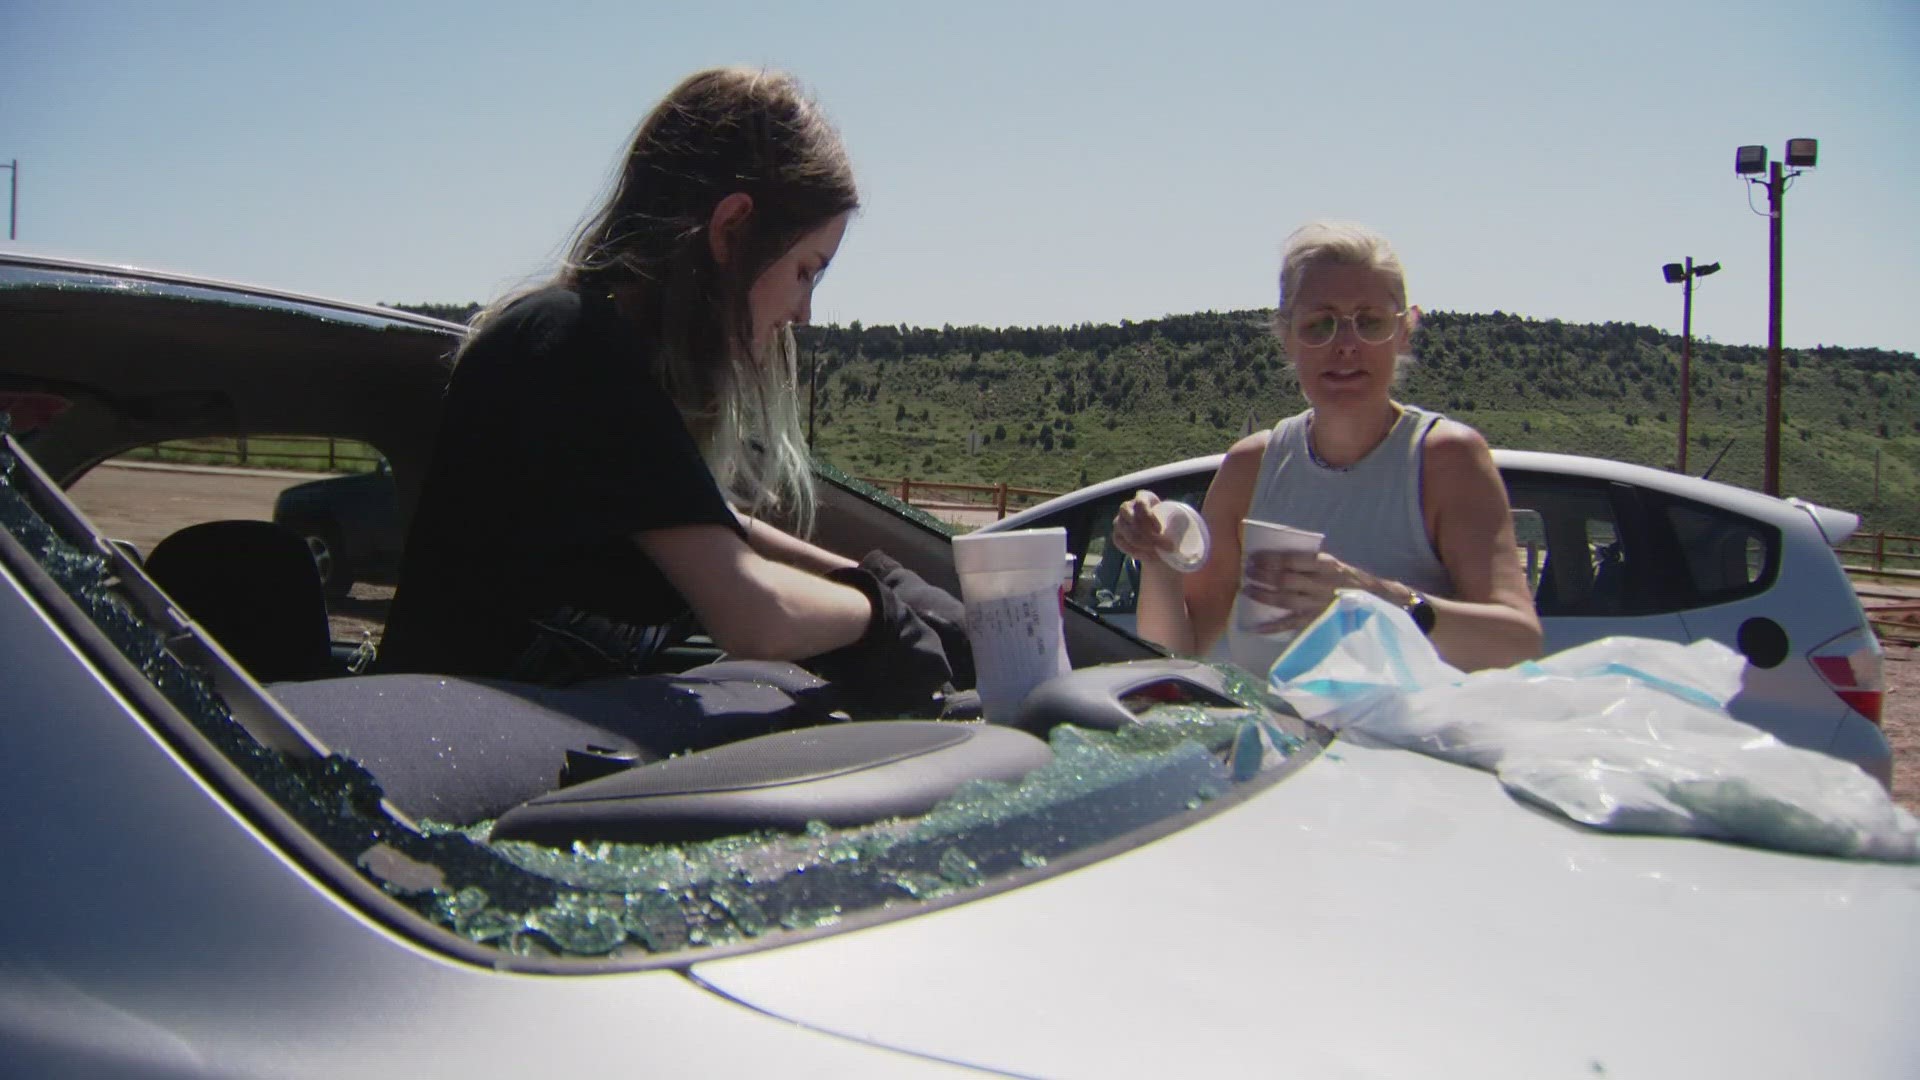 A concertgoer's car at Red Rocks Amphitheater was damaged after a massive hail storm swept through Colorado Wednesday night